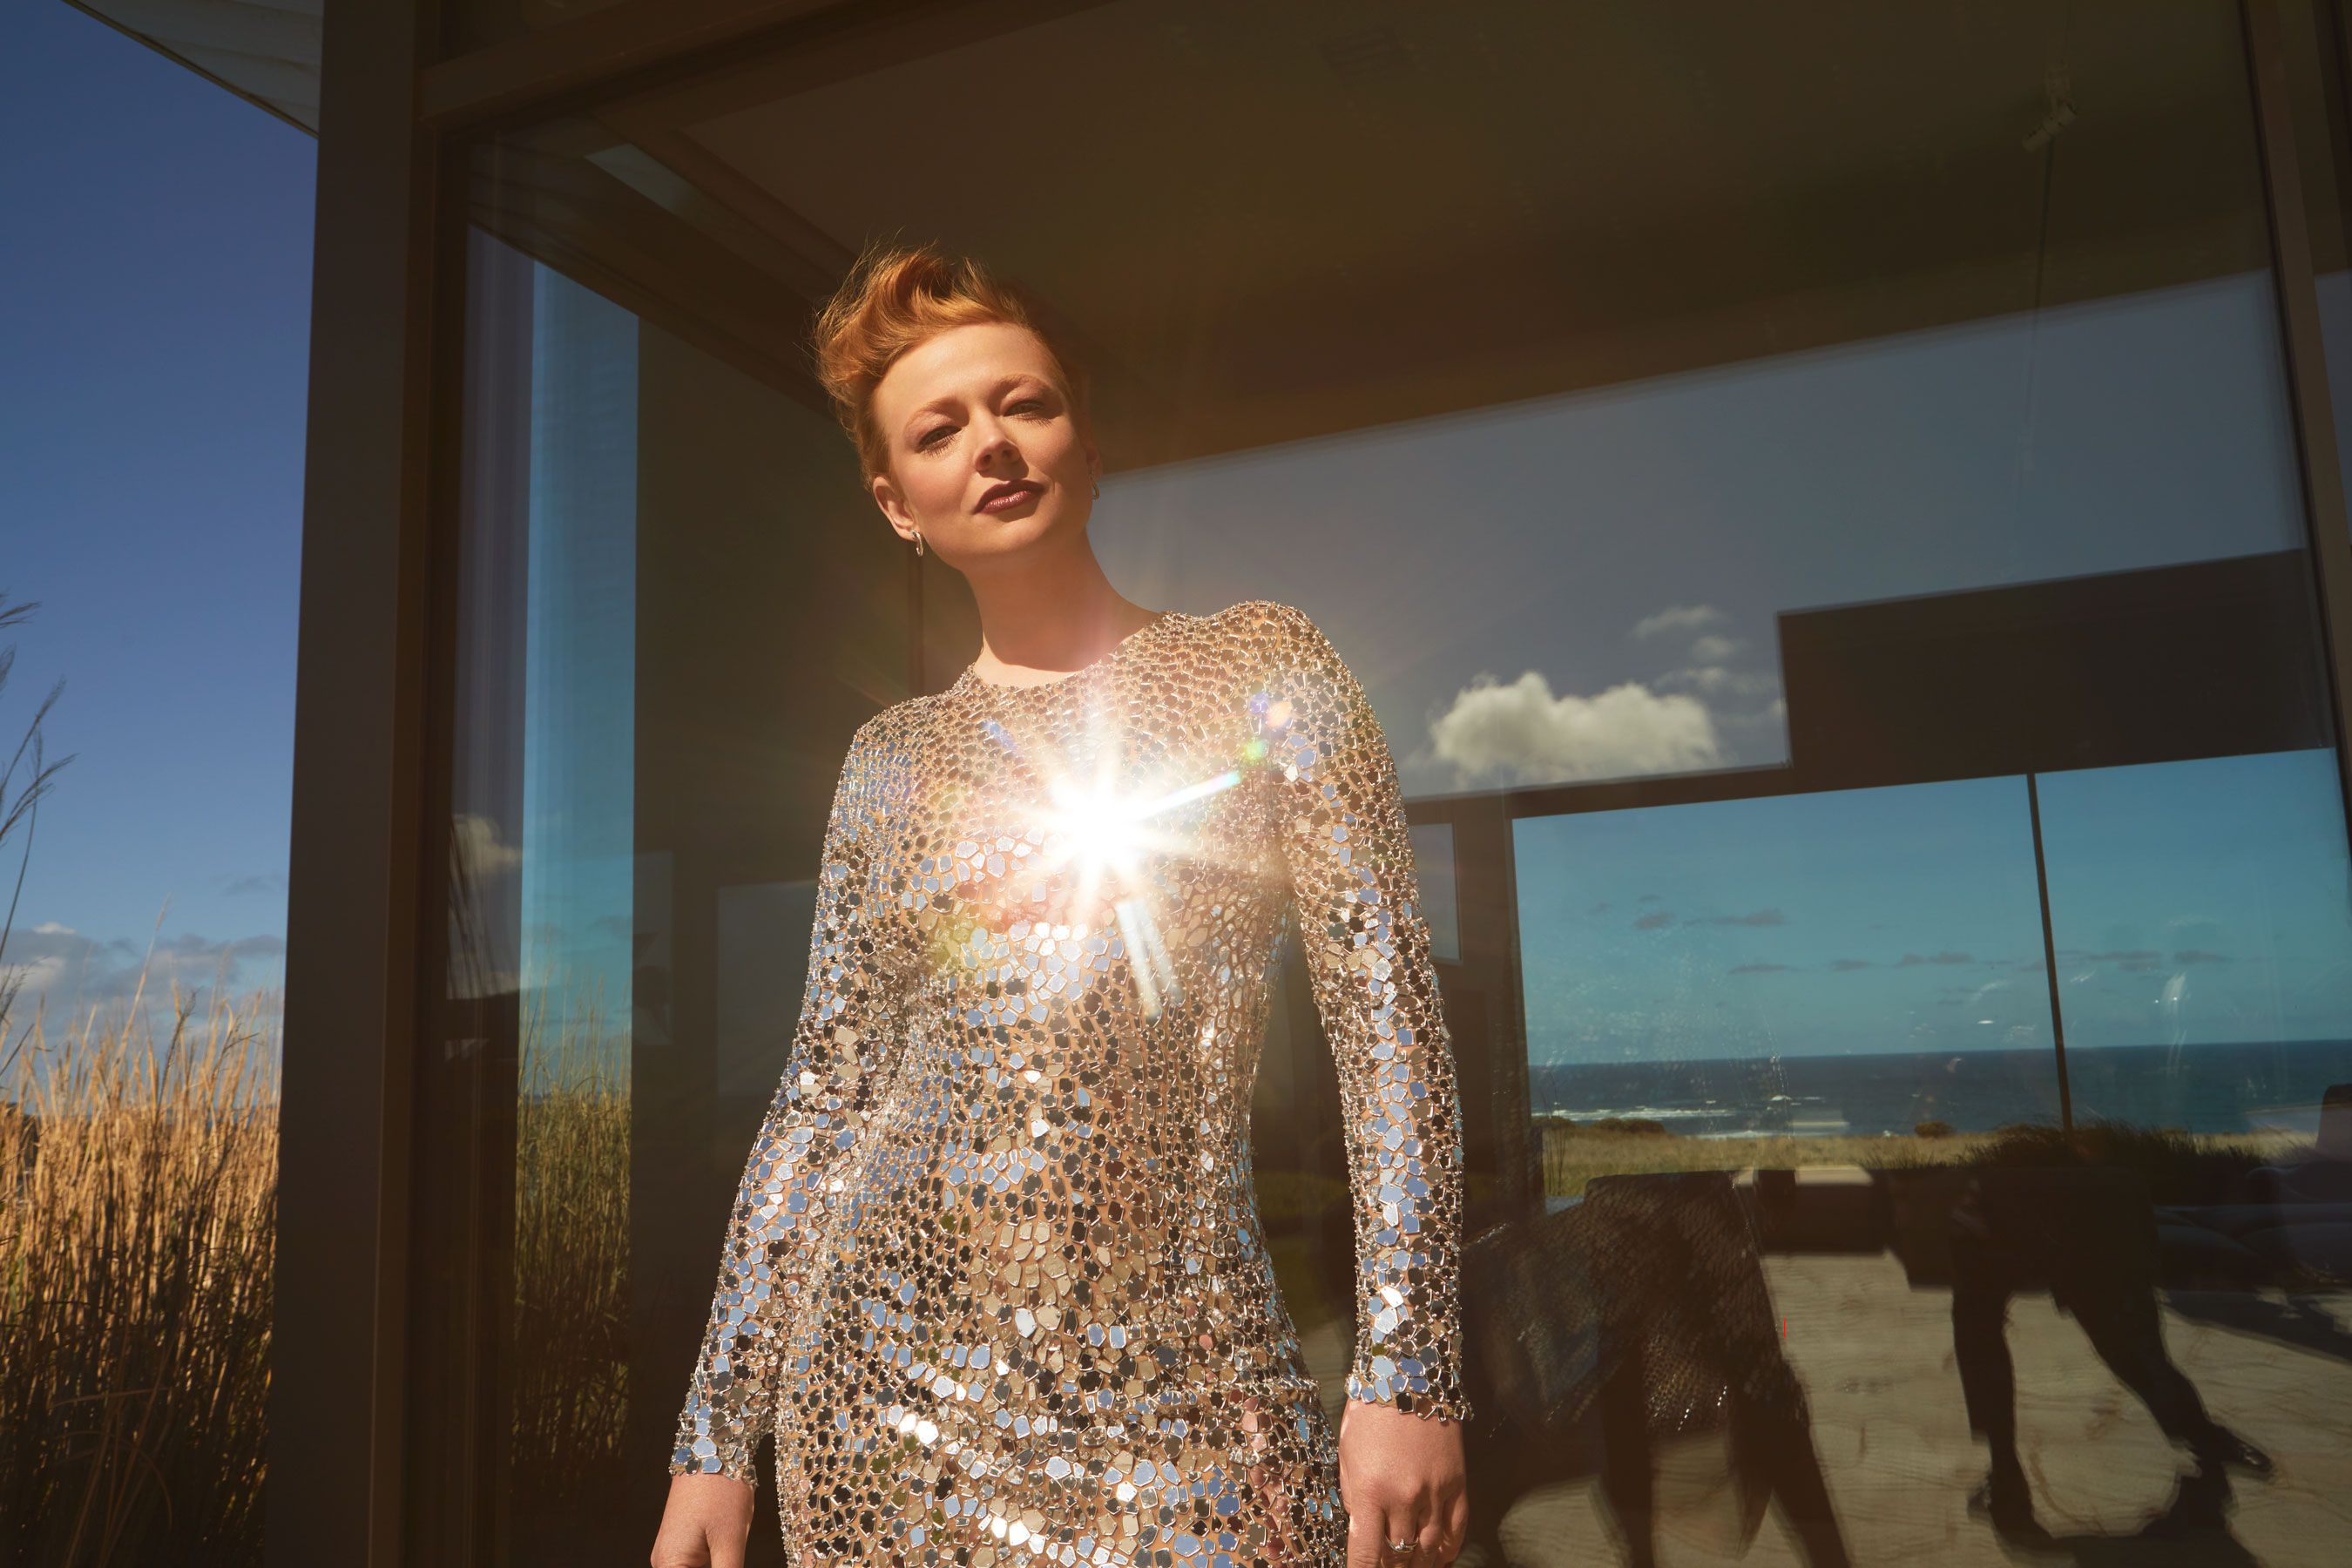 Sarah Snook on Succession Season 3, Shiv and Logan, and Life with Her New  Husband